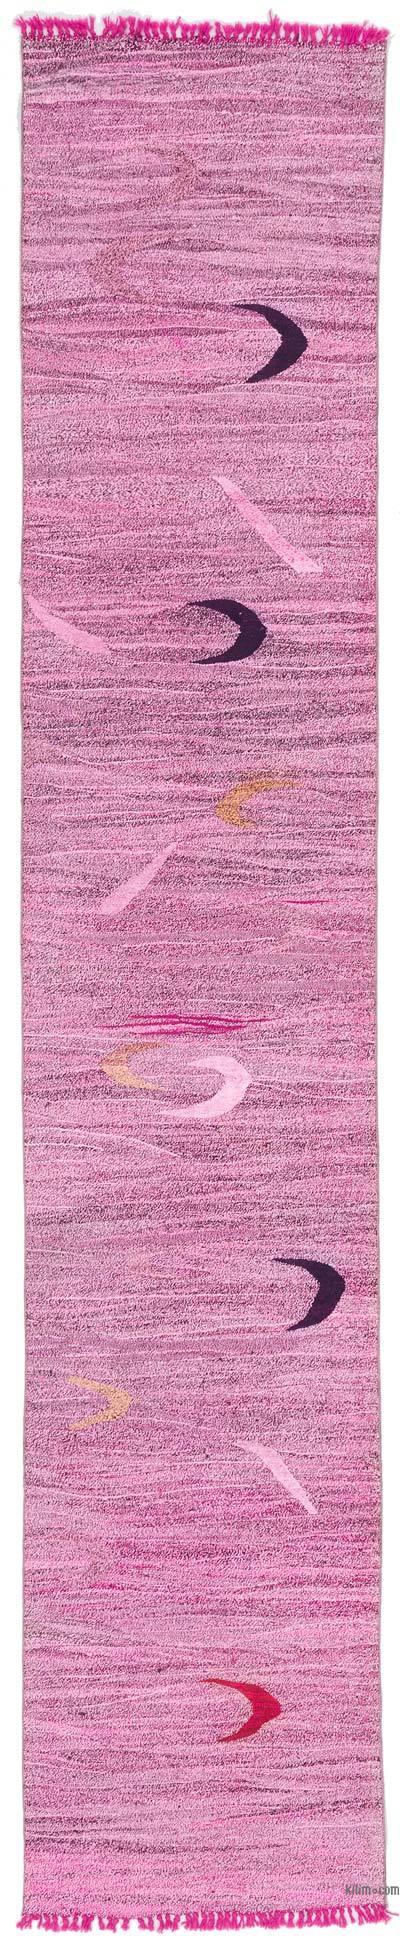 Pink New Contemporary Handwoven Kilim Runner - 2' 9" x 14' 3" (33 in. x 171 in.)